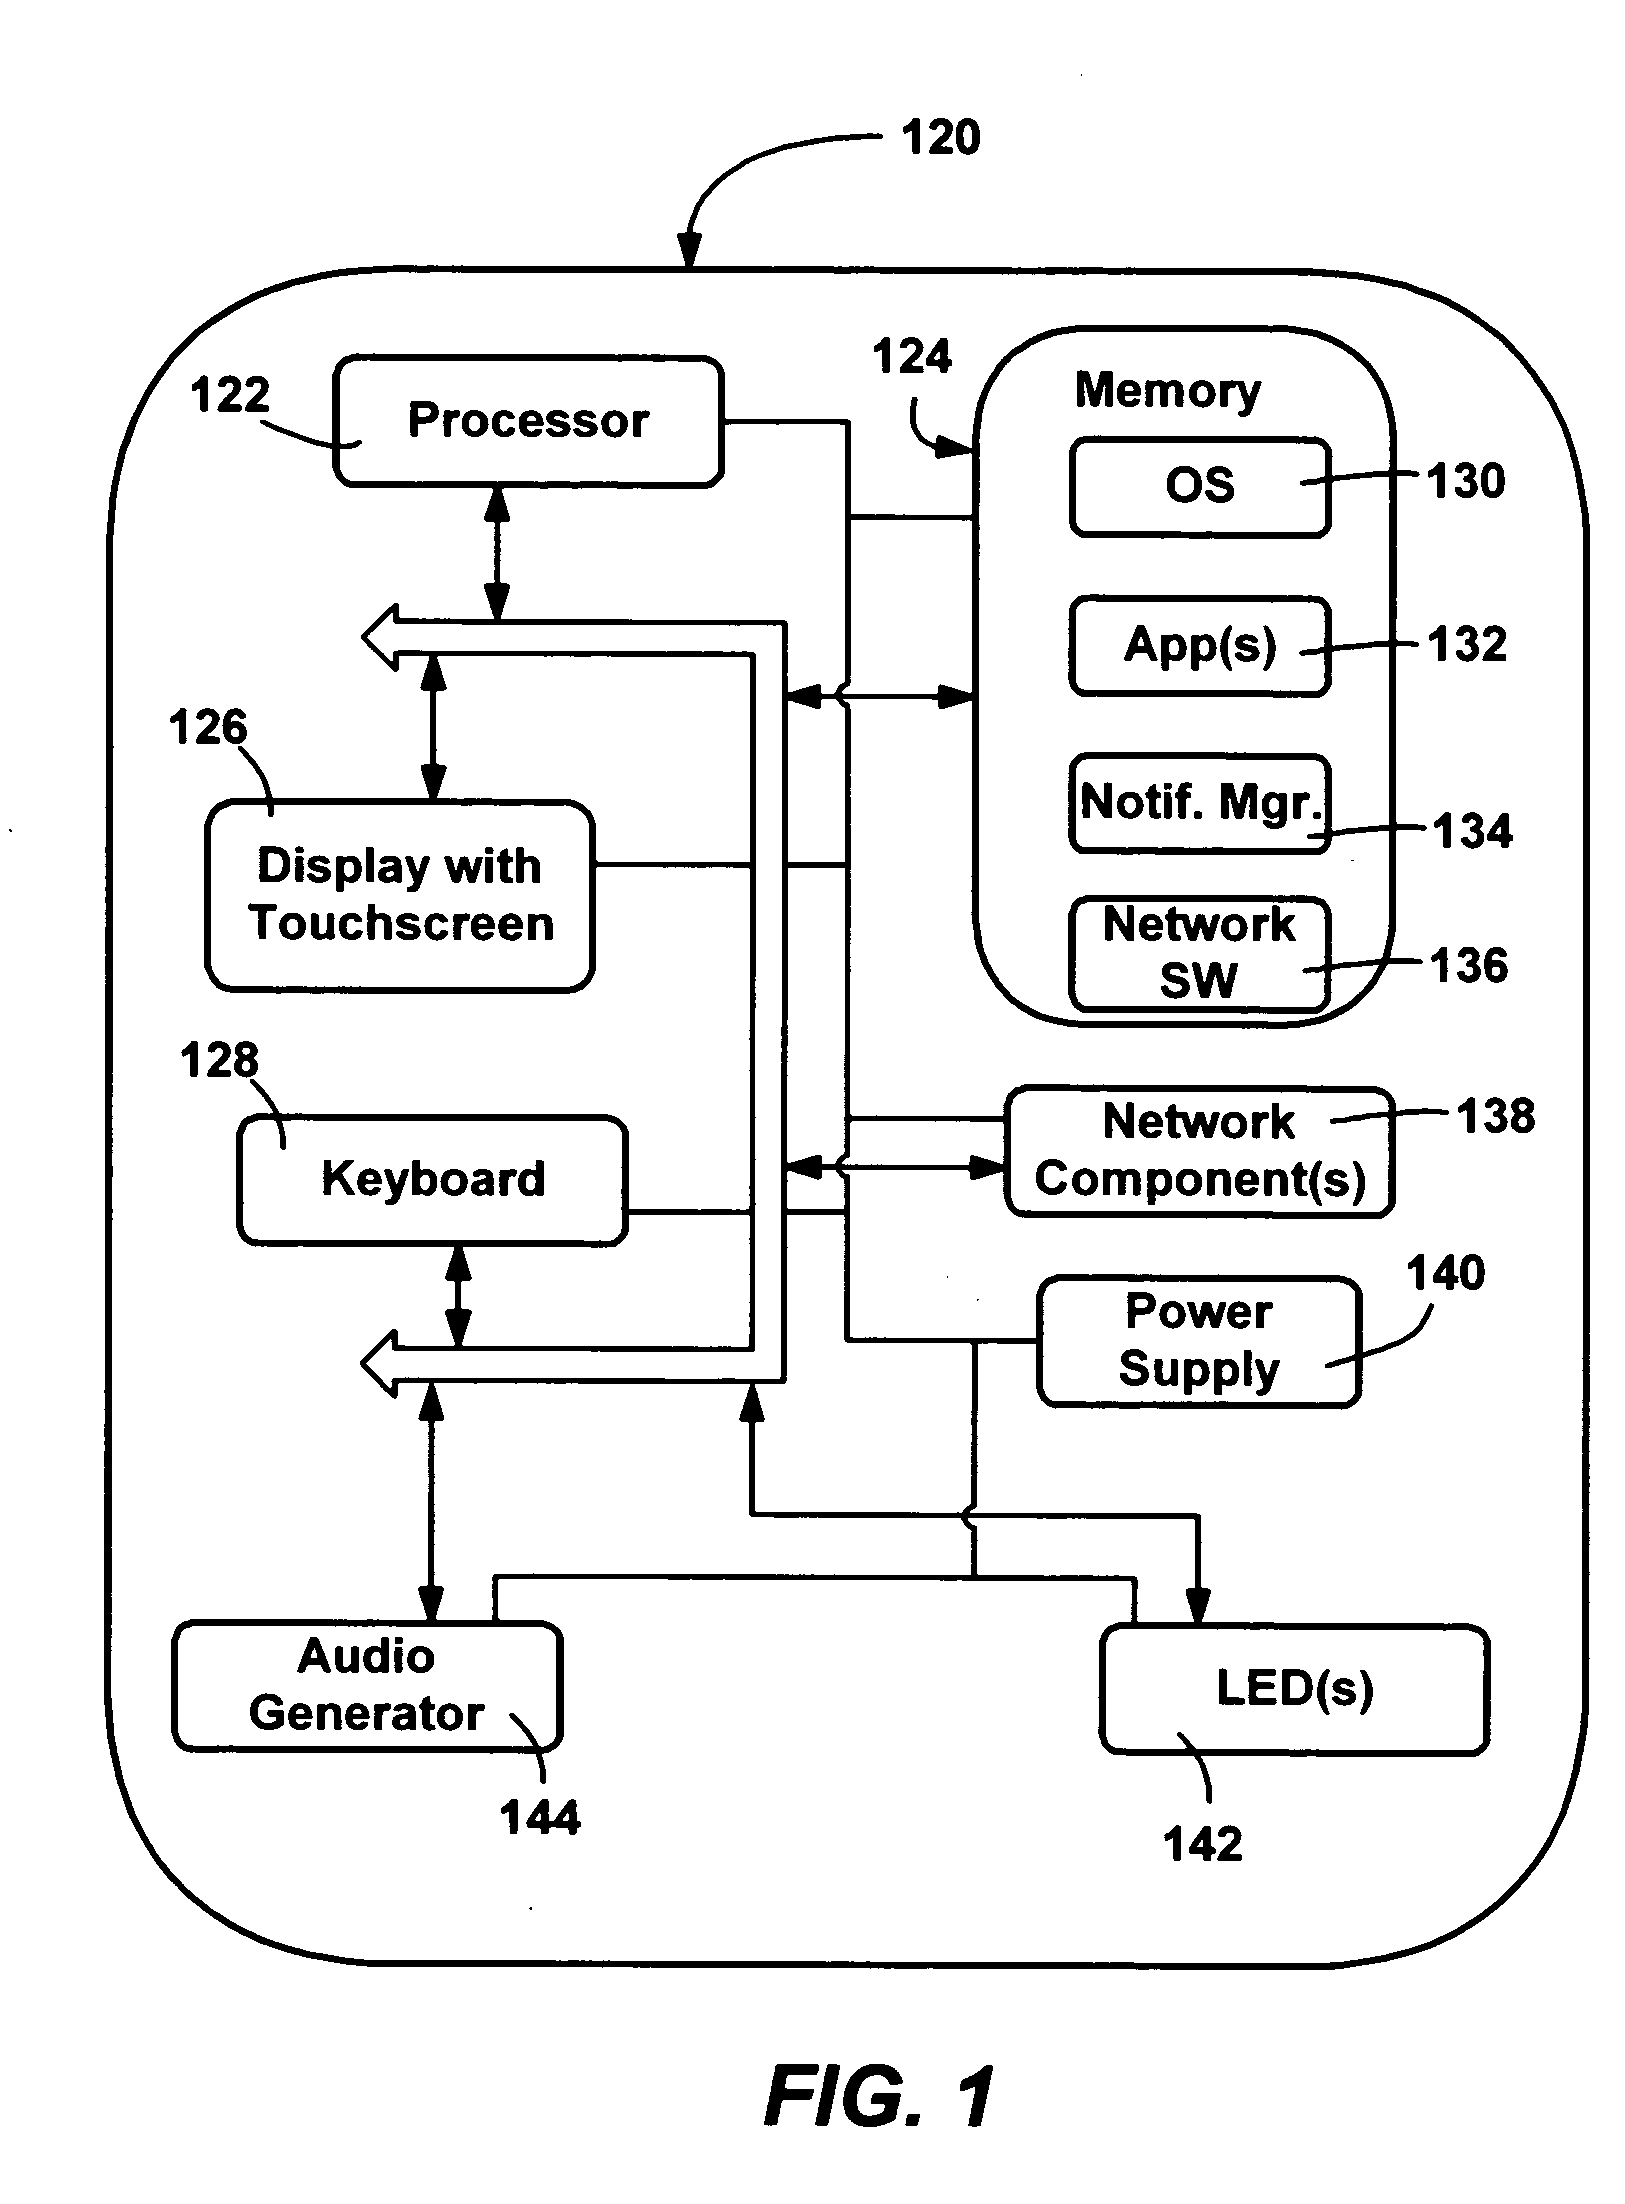 Method and system for improved viewing and navigation of content